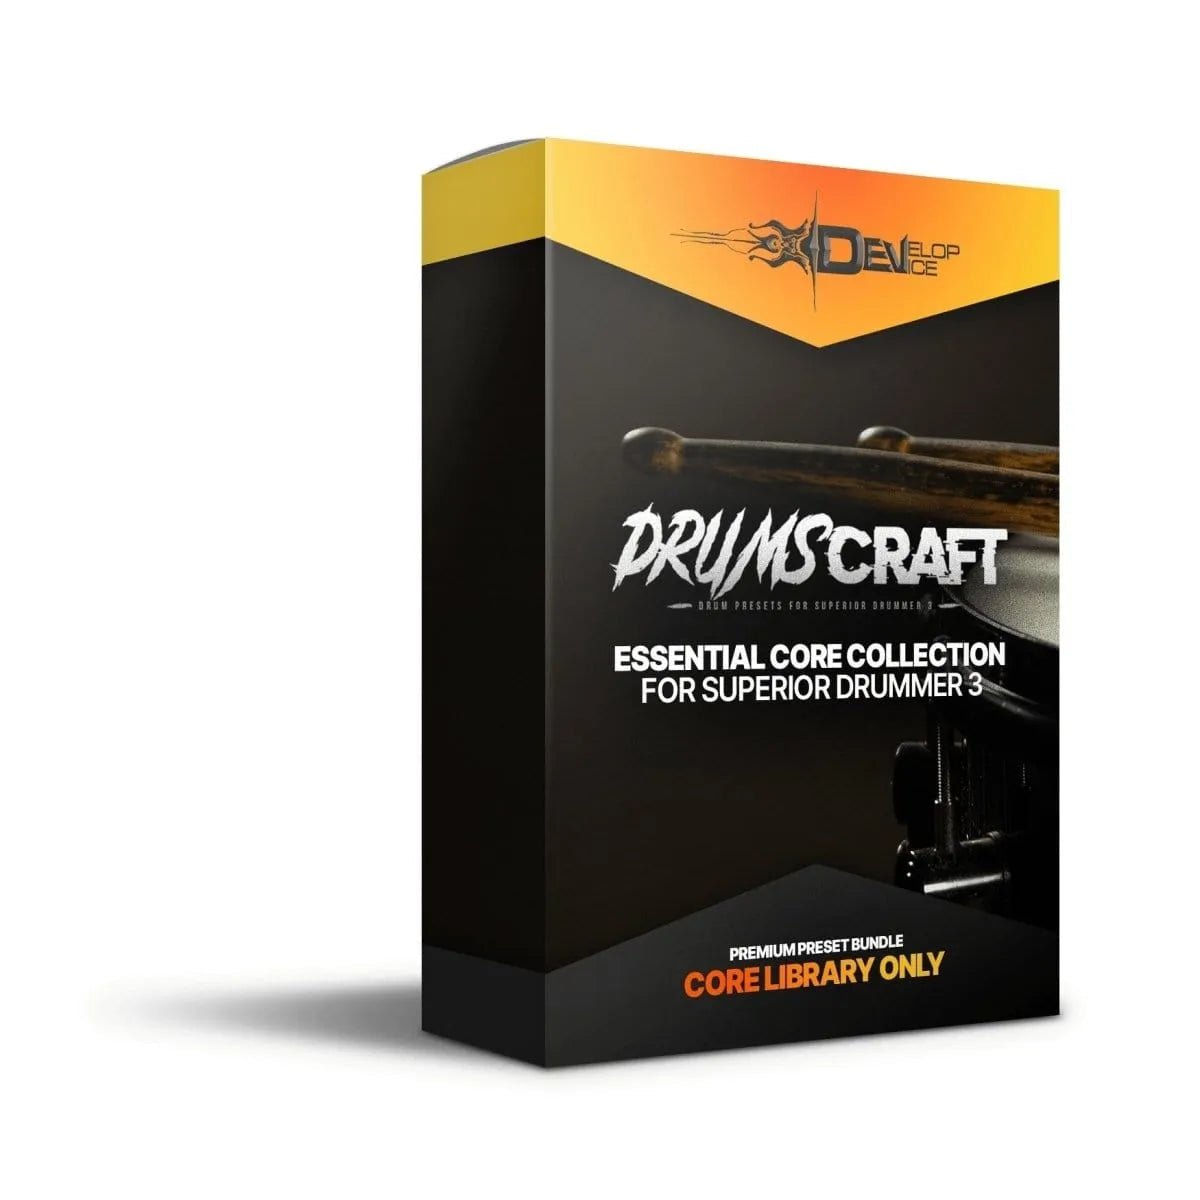 Essential Core Collection - 45 Superior Drummer 3 Presets - Superior Drummer 3 Presets - Develop Device Studio